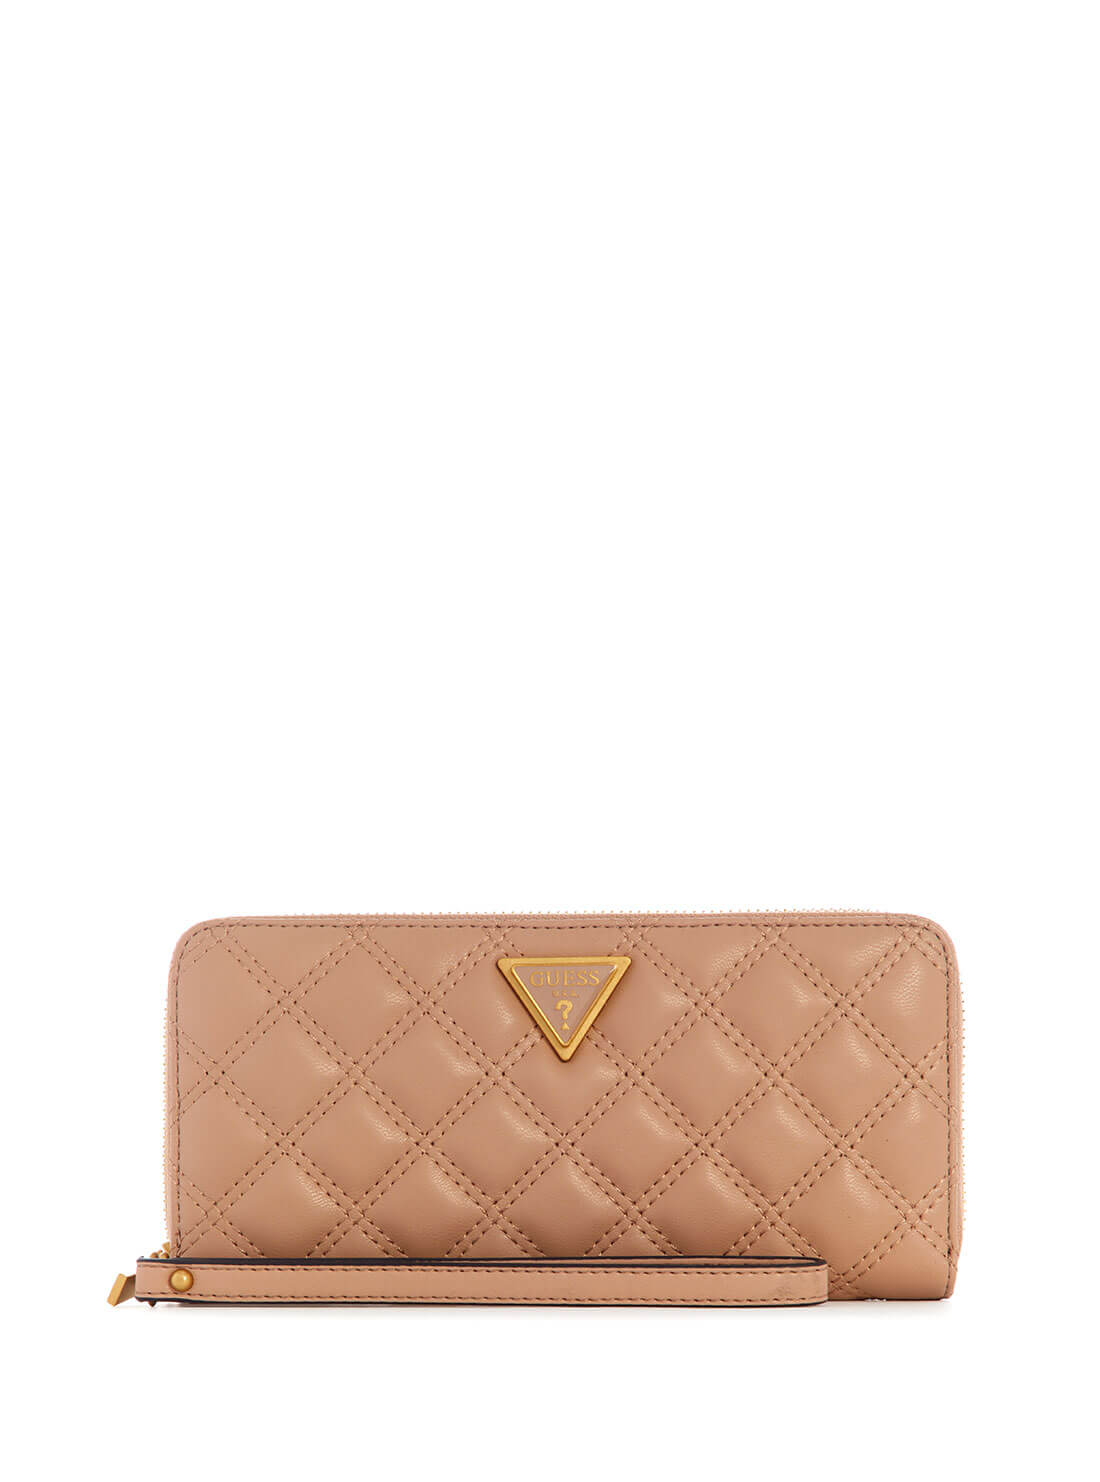 Women's Beige Giully Large Wallet front view